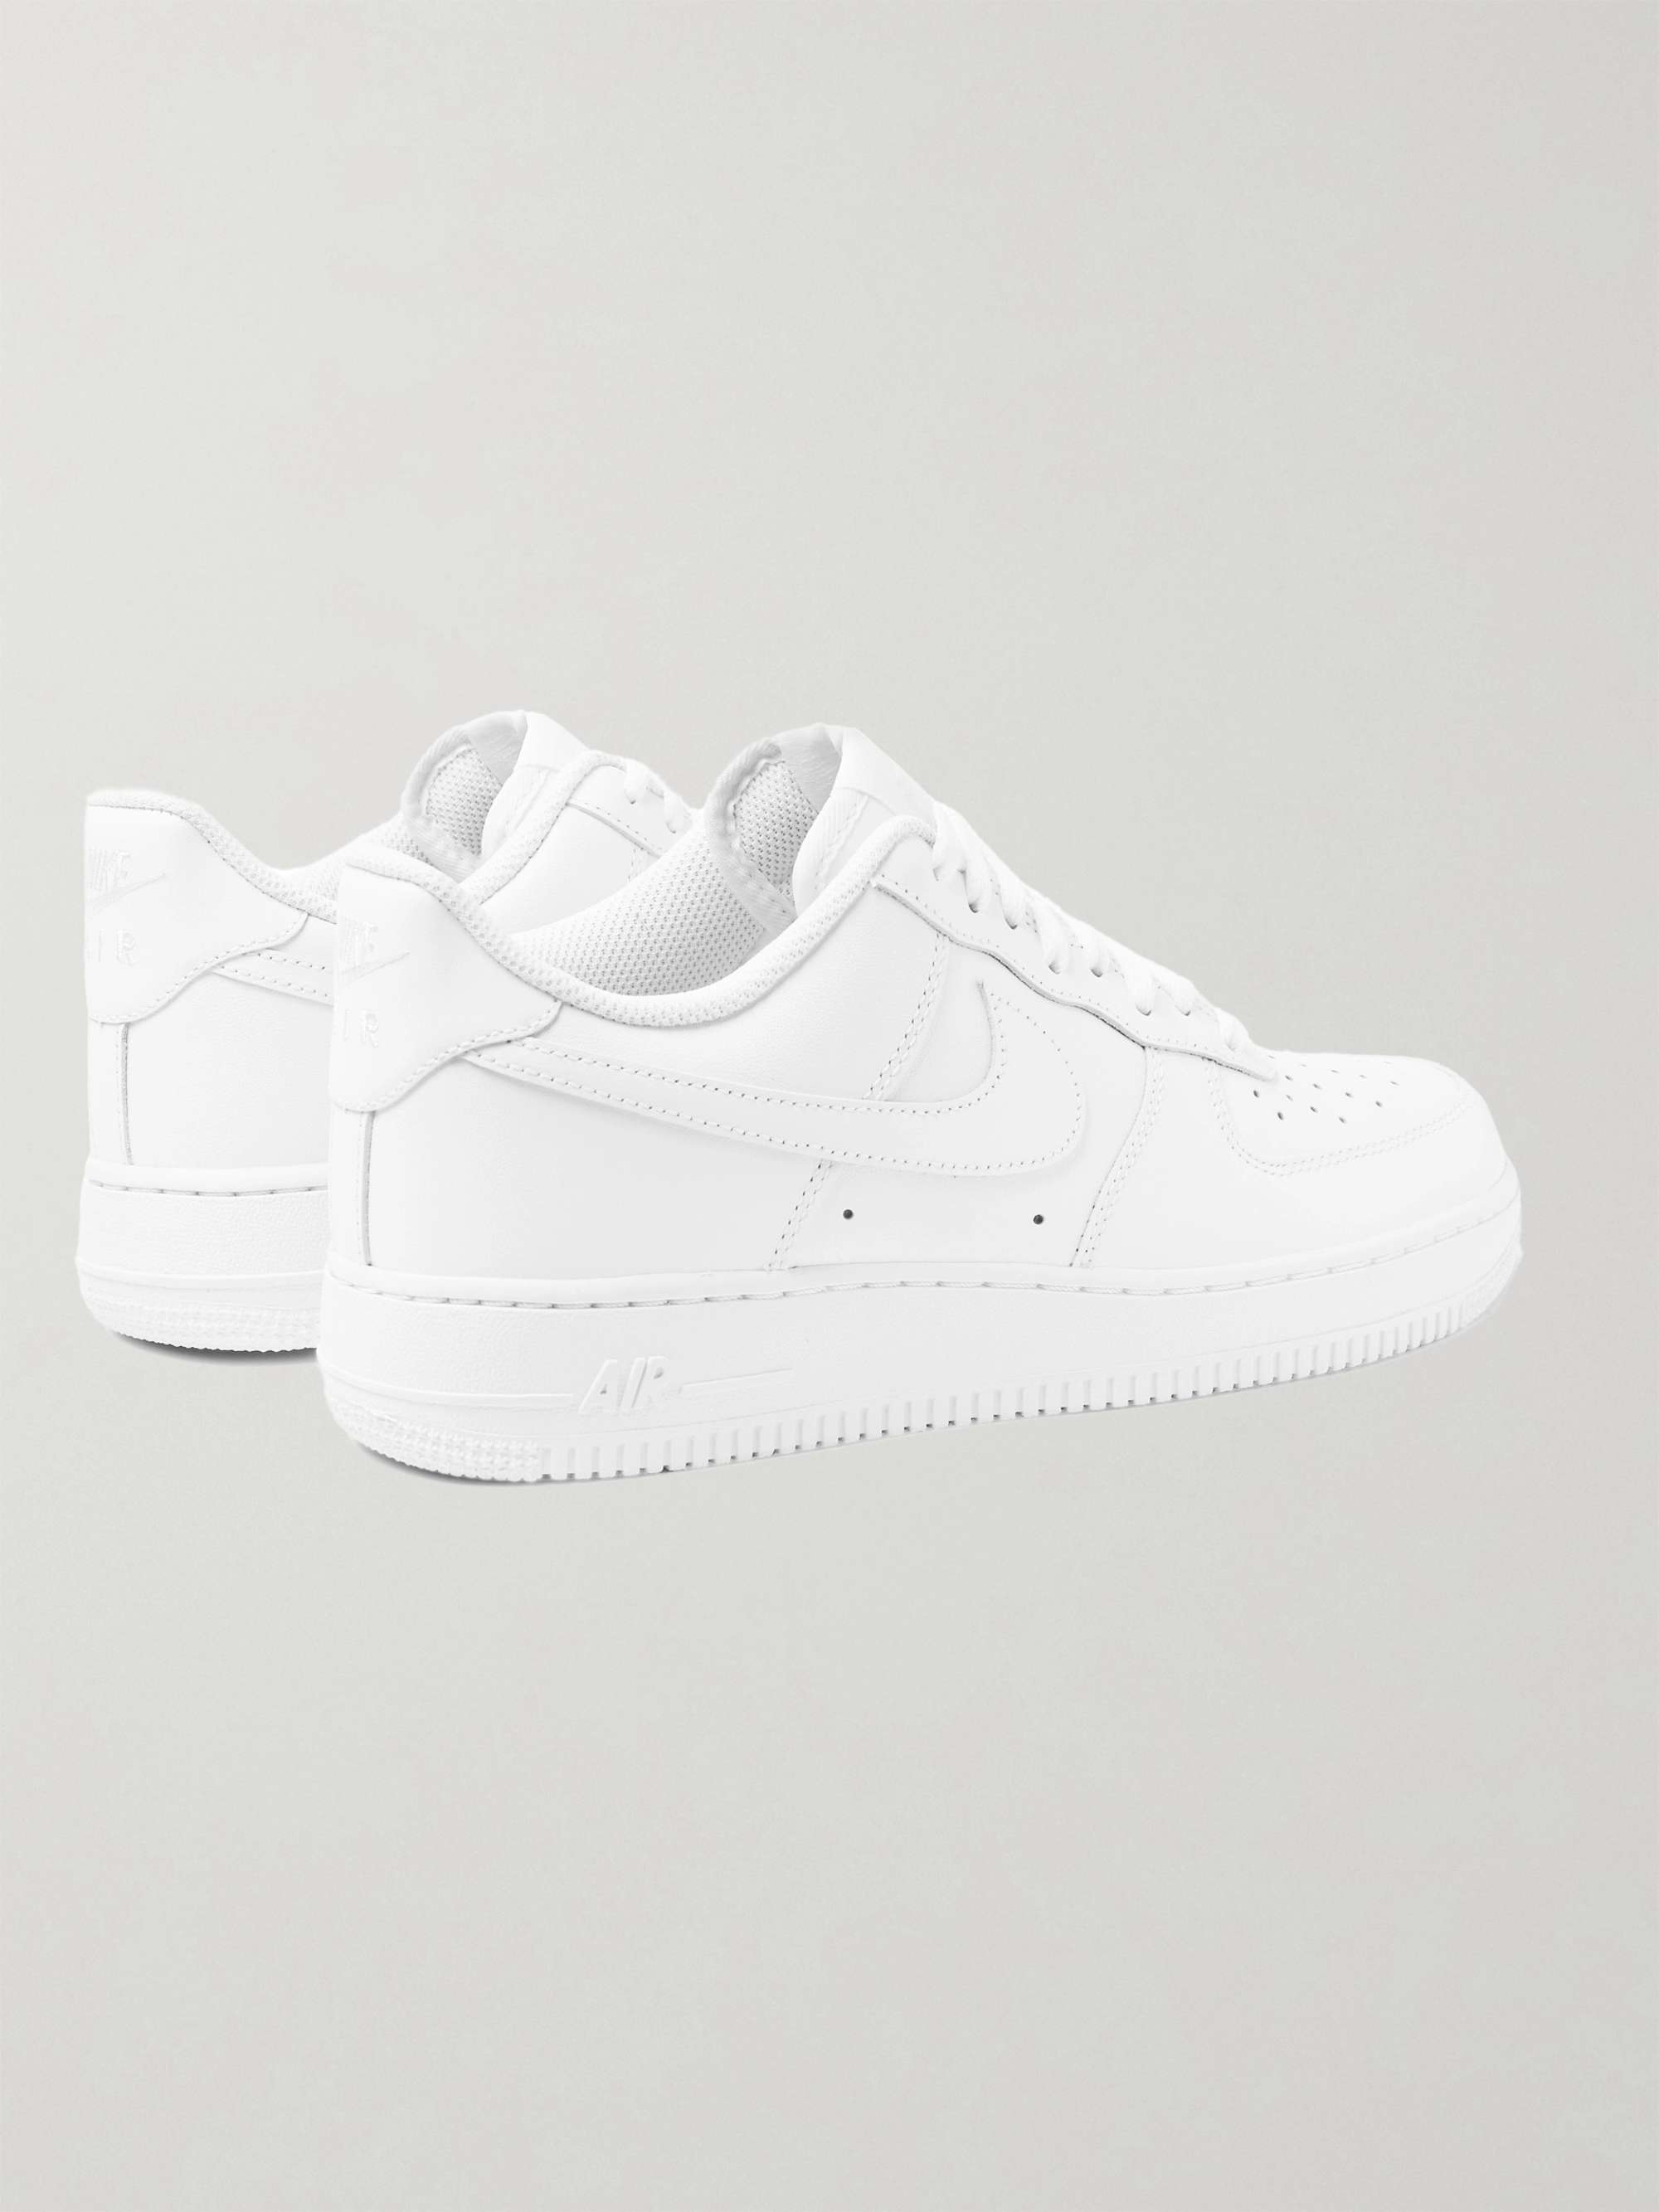 NIKE Air Force 1 '07 Leather Sneakers